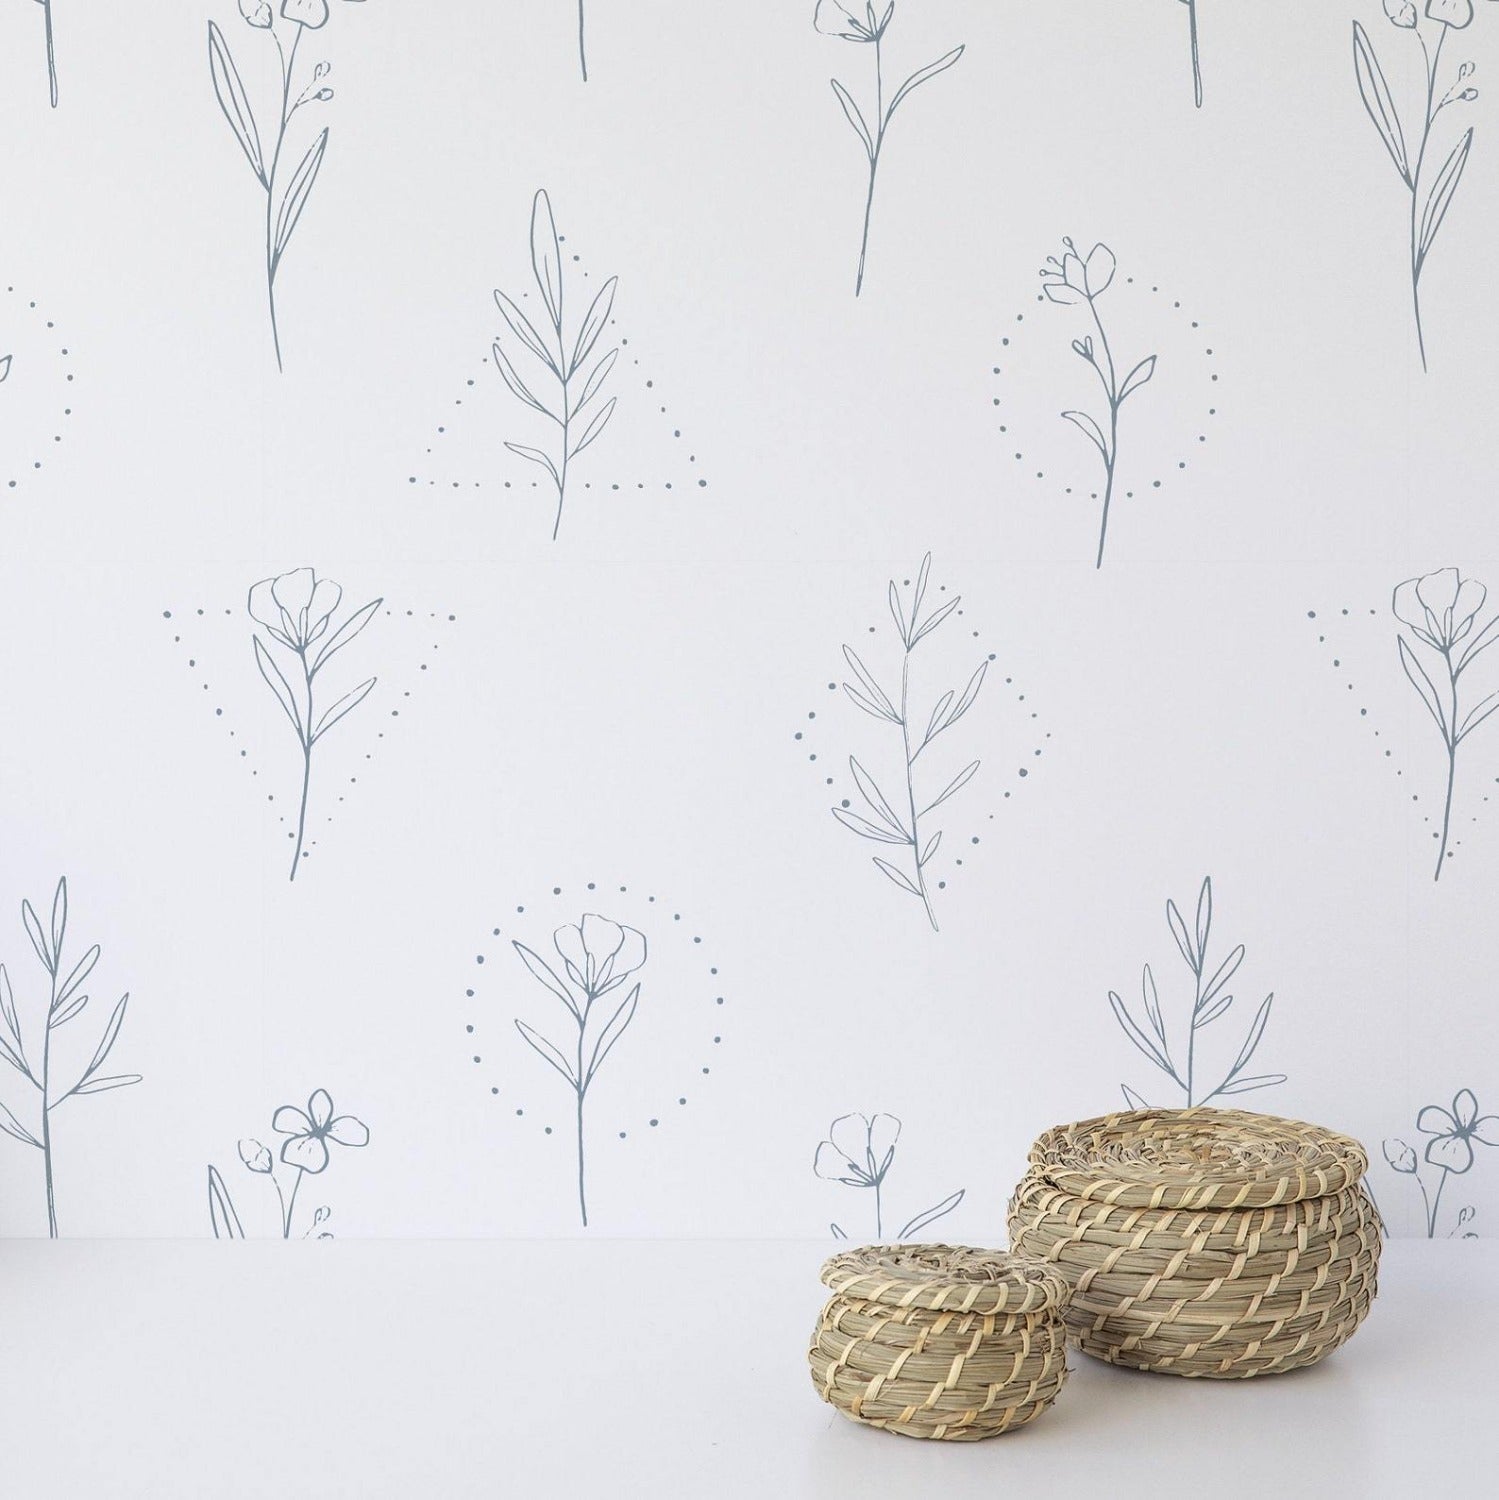 An interior setting with a segment of wall covered in the Minimal Floral Line Art Wallpaper. The pattern displays a series of delicate botanical illustrations in blue line art on a white background. In the foreground, two small woven baskets rest on a surface, complementing the natural theme.